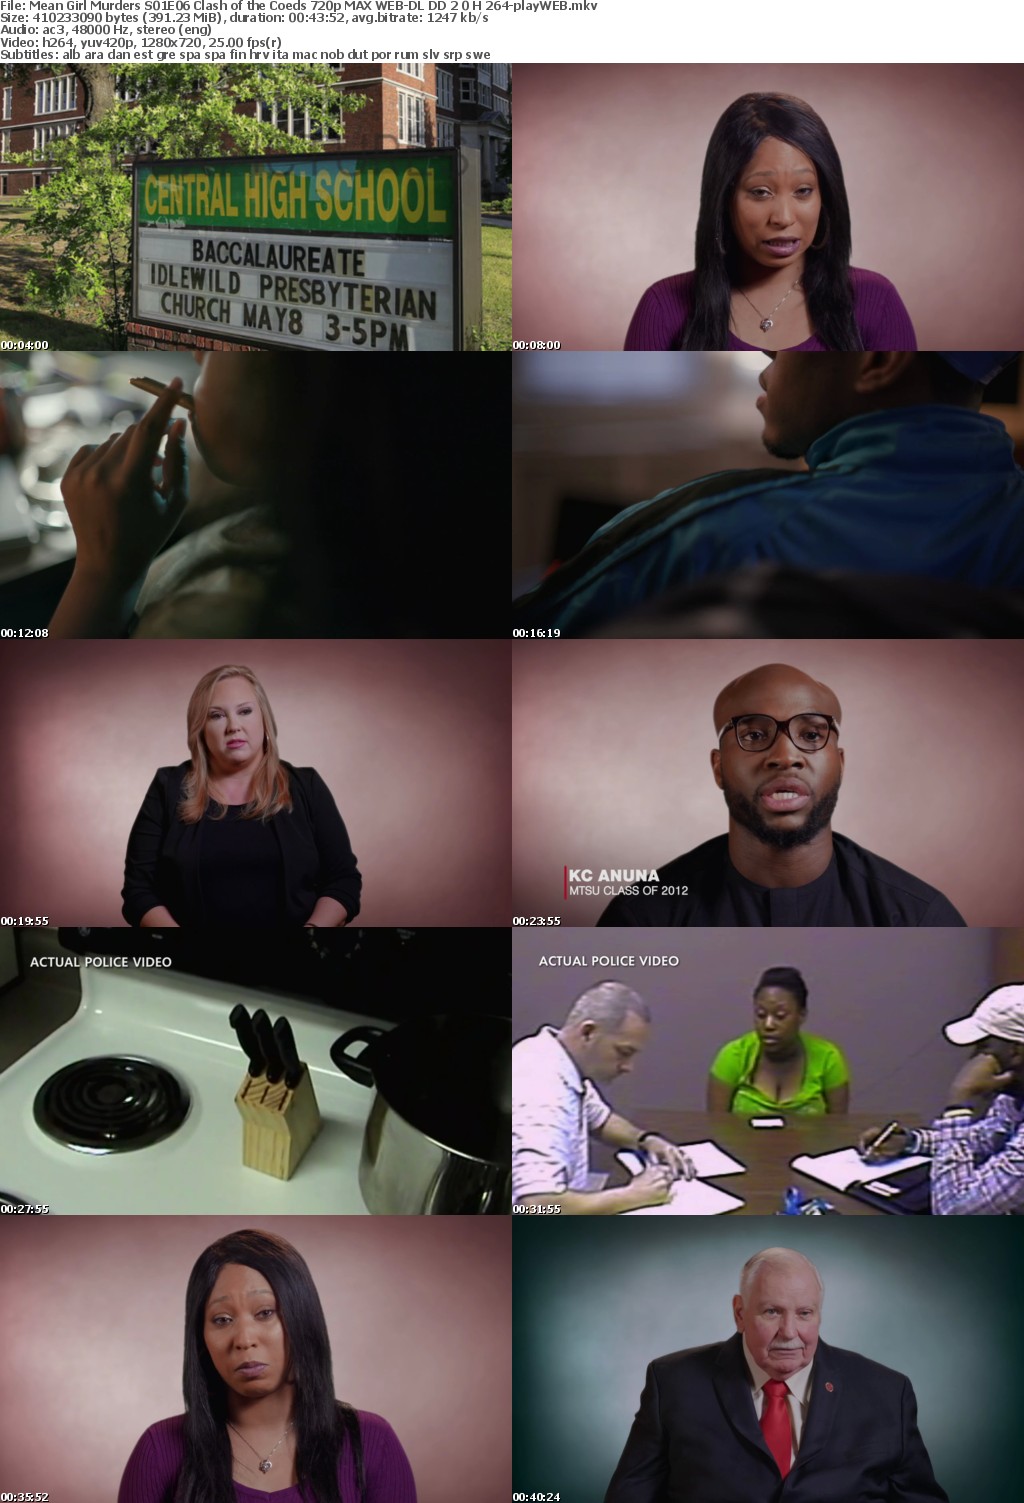 Mean Girl Murders S01E06 Clash of the Coeds 720p MAX WEB-DL DD 2 0 H 264-playWEB